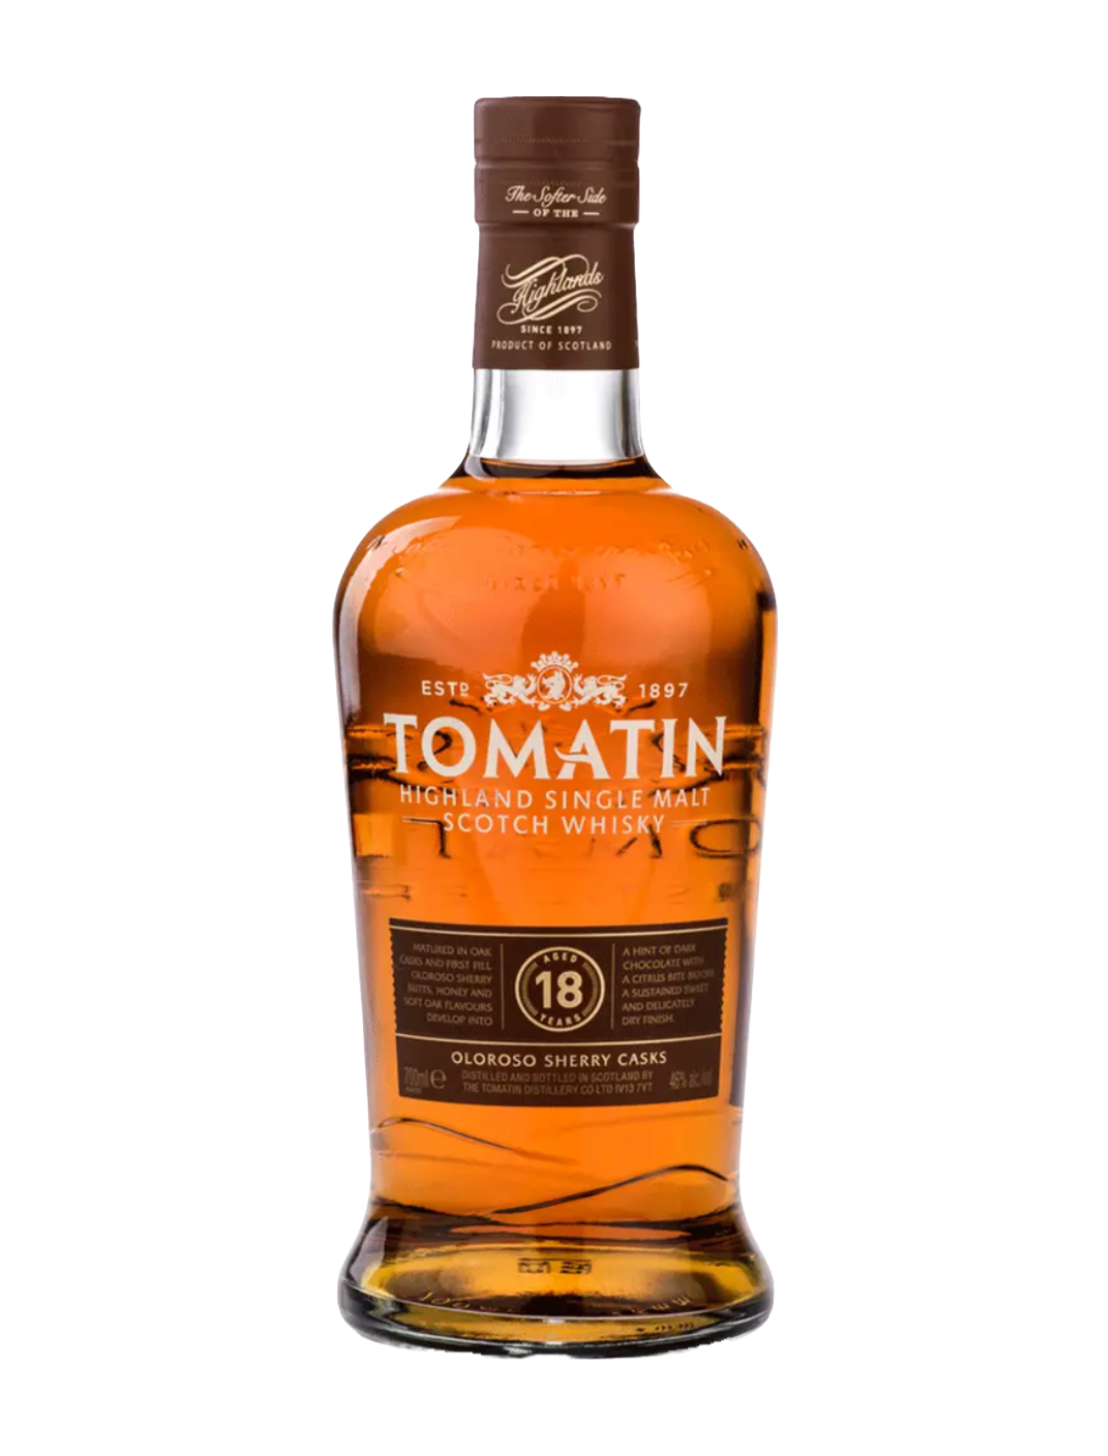 An elegant bottle of Tomatin Highland Single Malt 36 Year Old in front of a plain white background